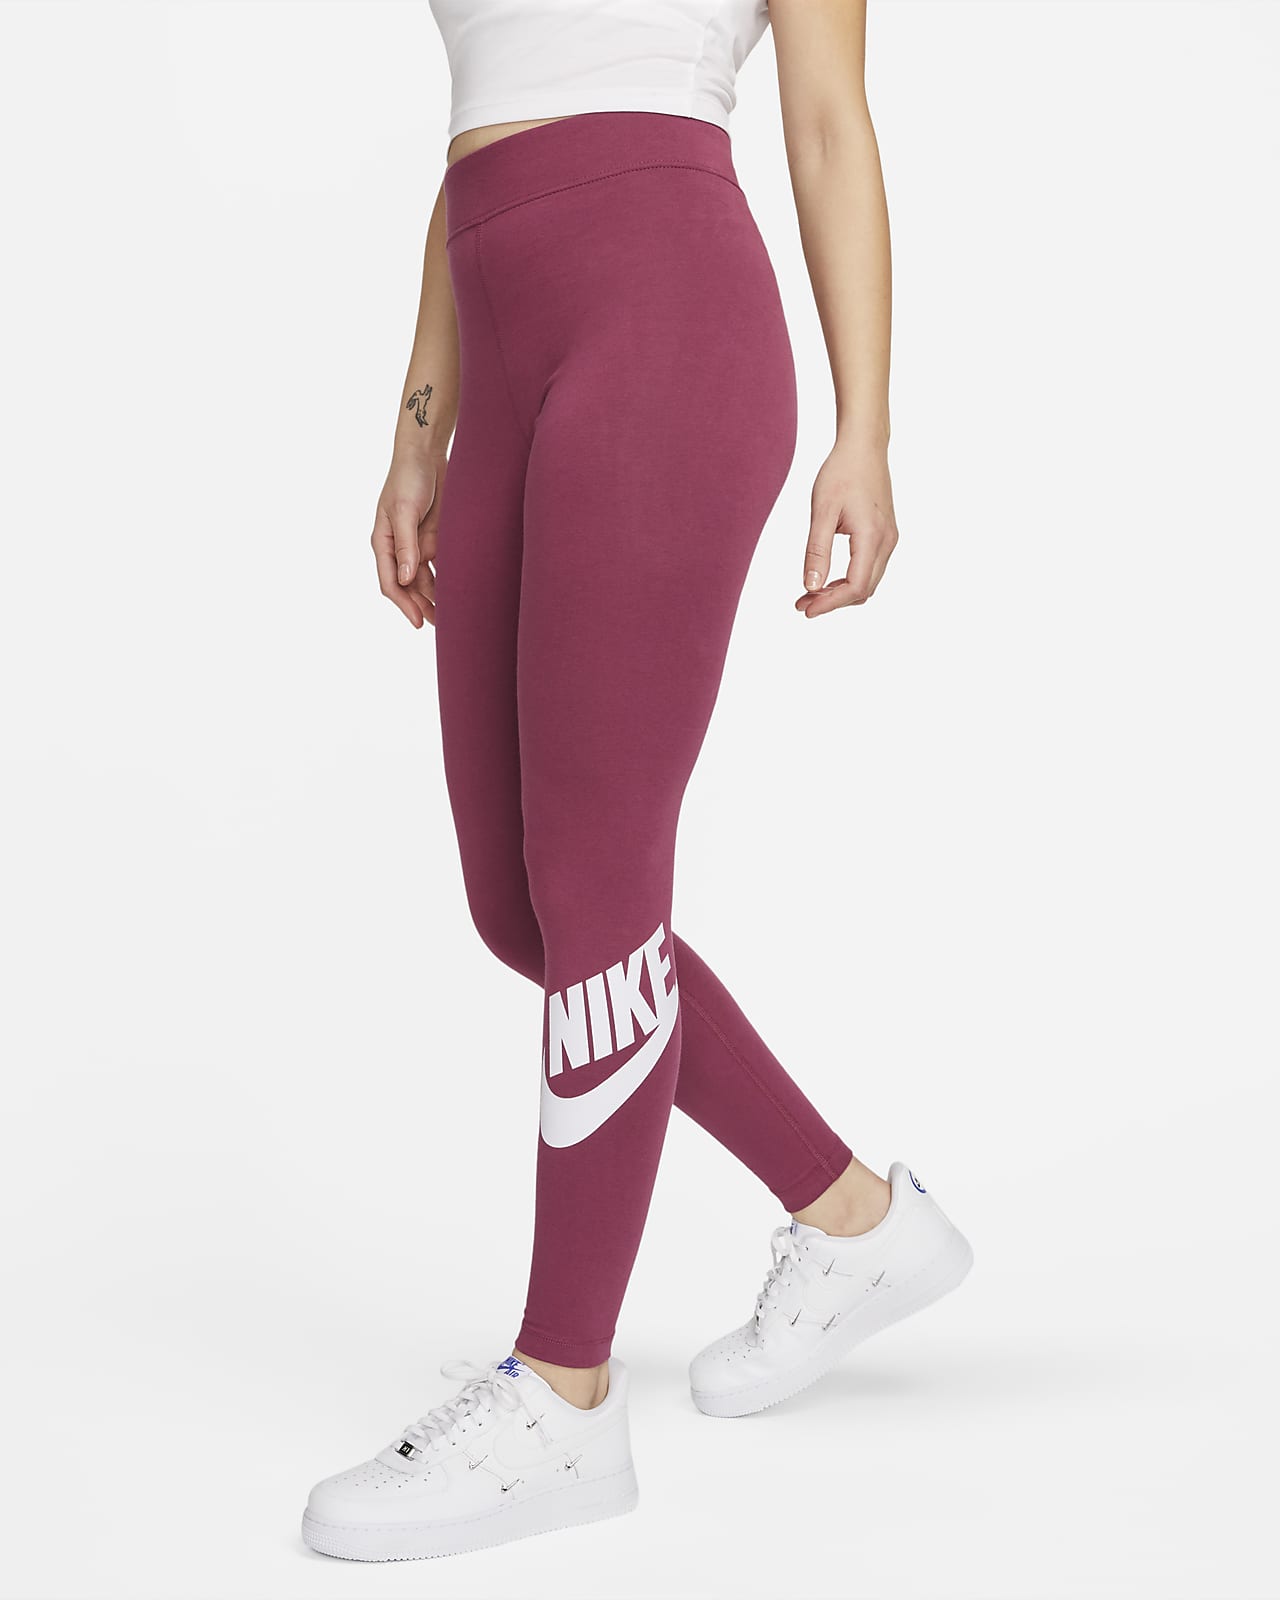 NWT Ladies Nike Leggings, Tight Fit, High Waisted, Full Length, Casual or  Gym